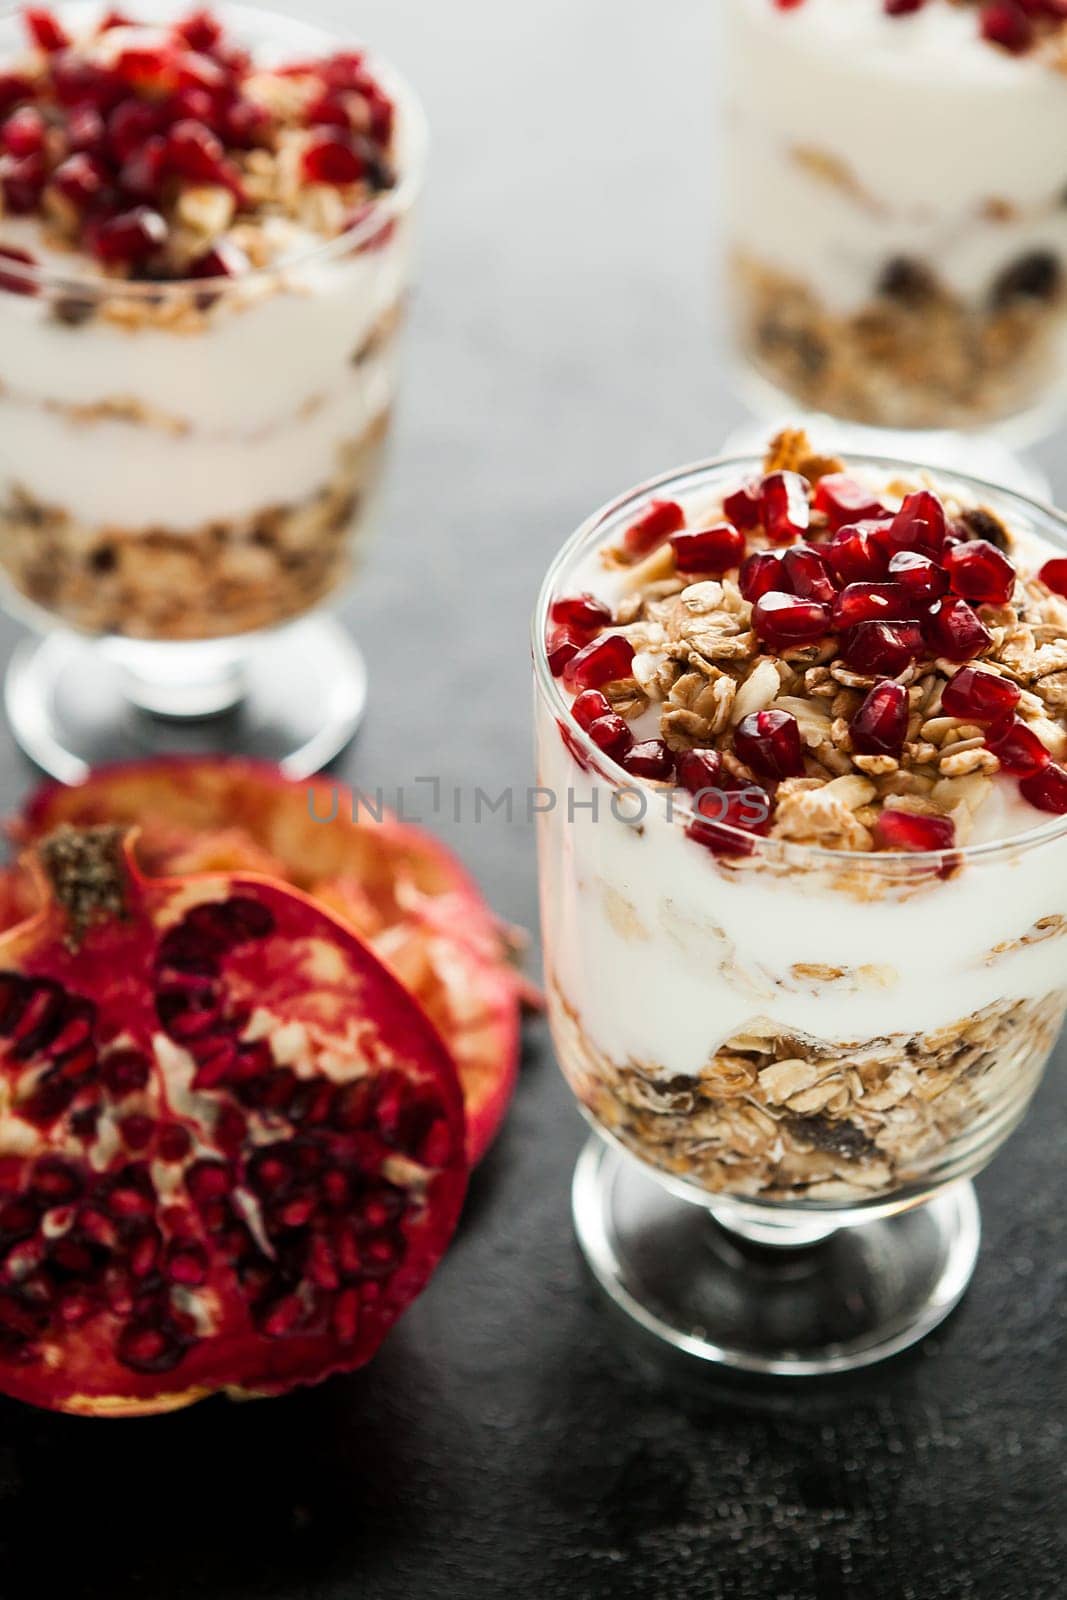 Fresh healthy home-made desset with muesli and pomegranate by DCStudio